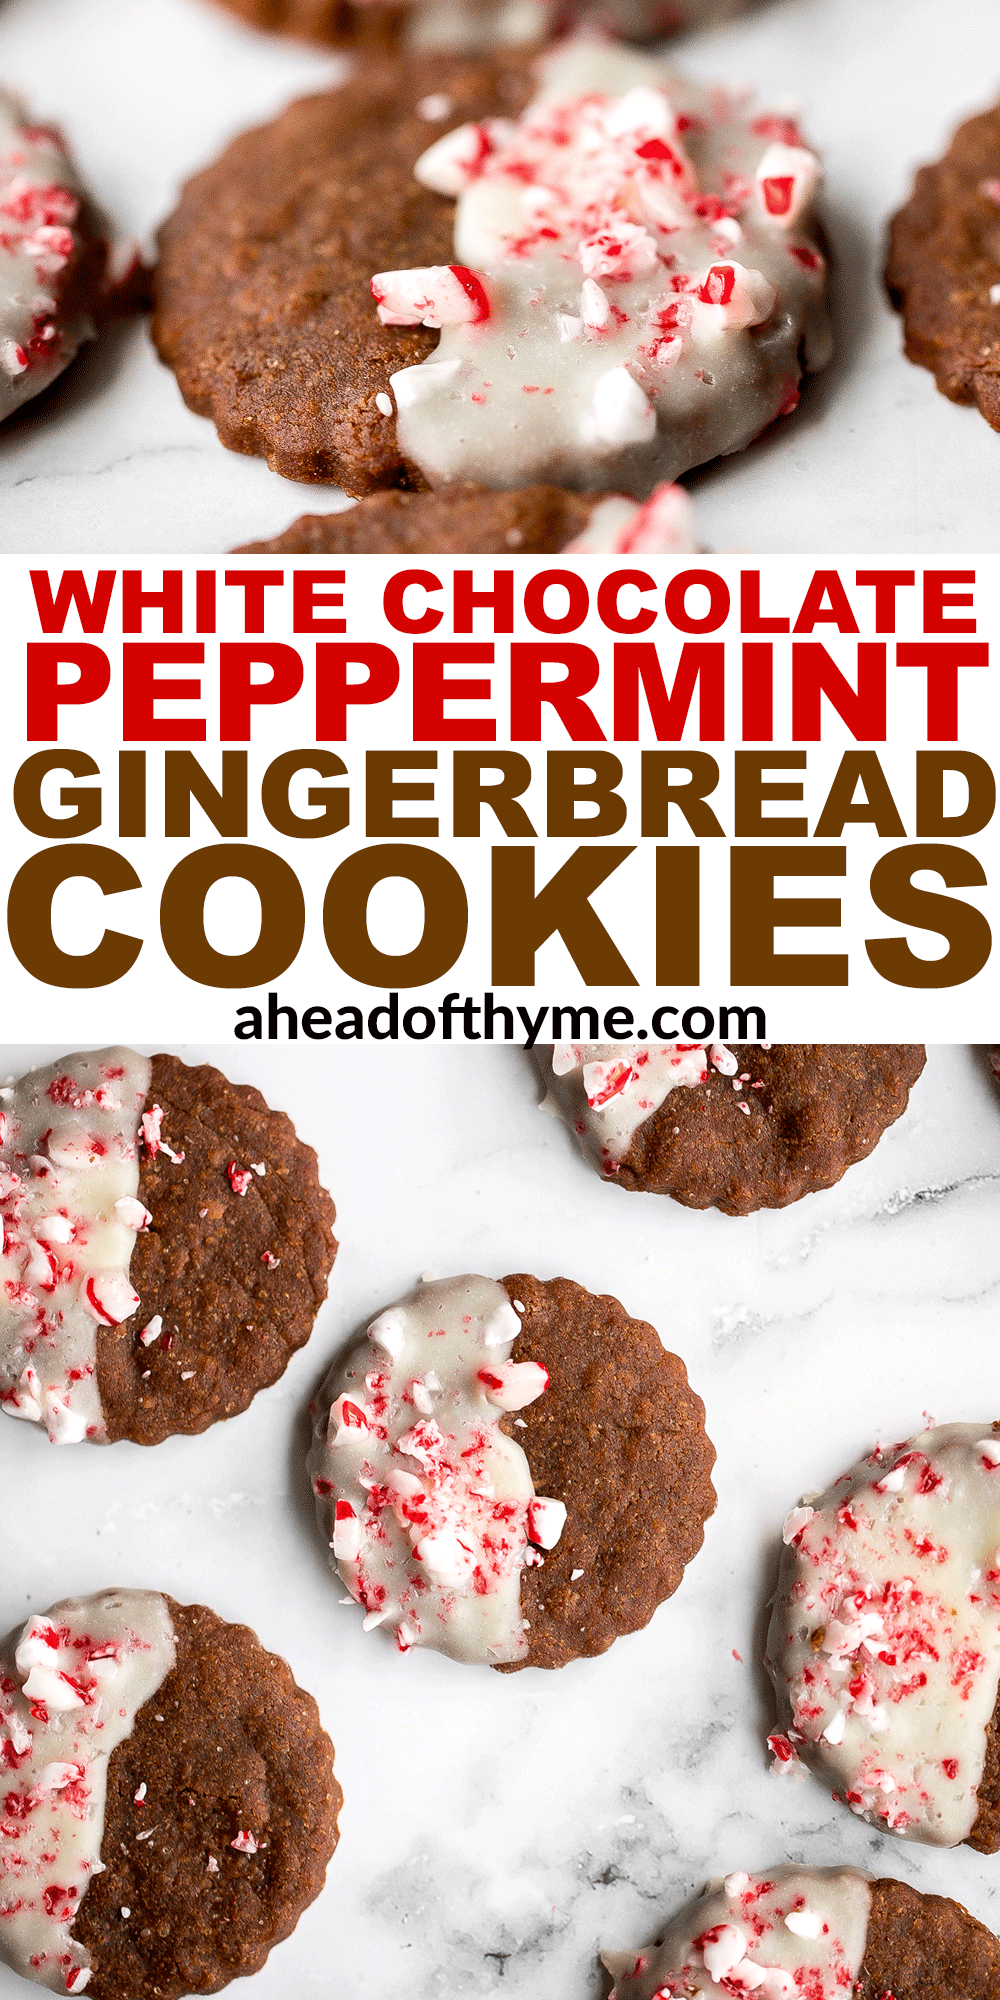 White Chocolate Peppermint Gingerbread Cookies